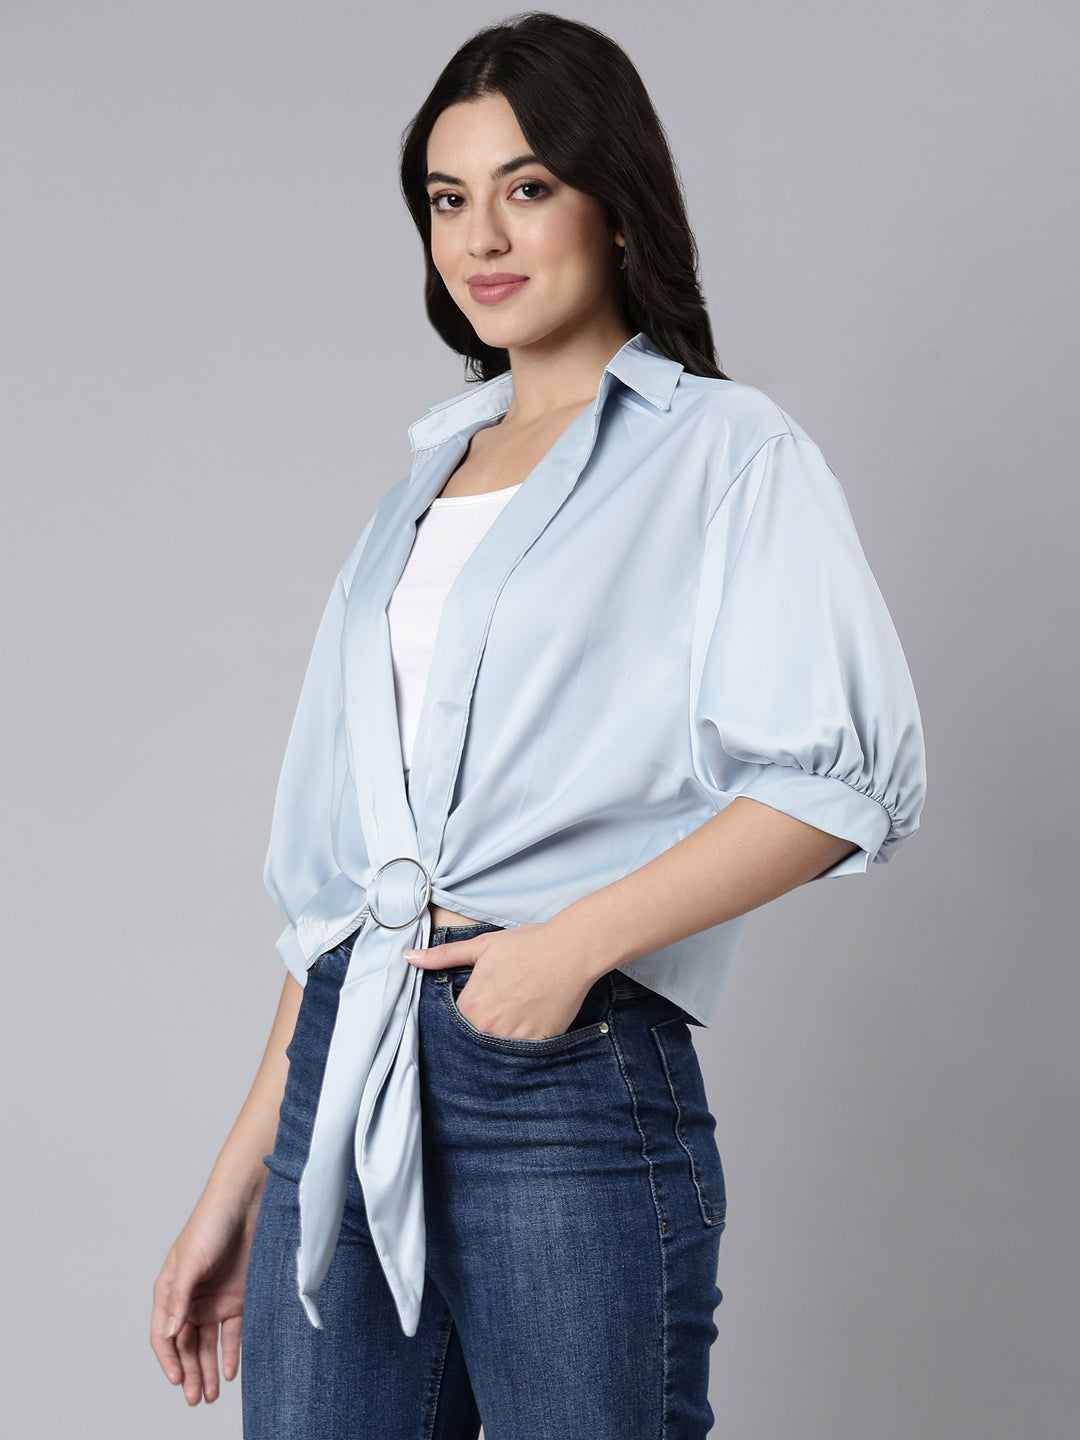 Women Solid Shirt Style Blue Top